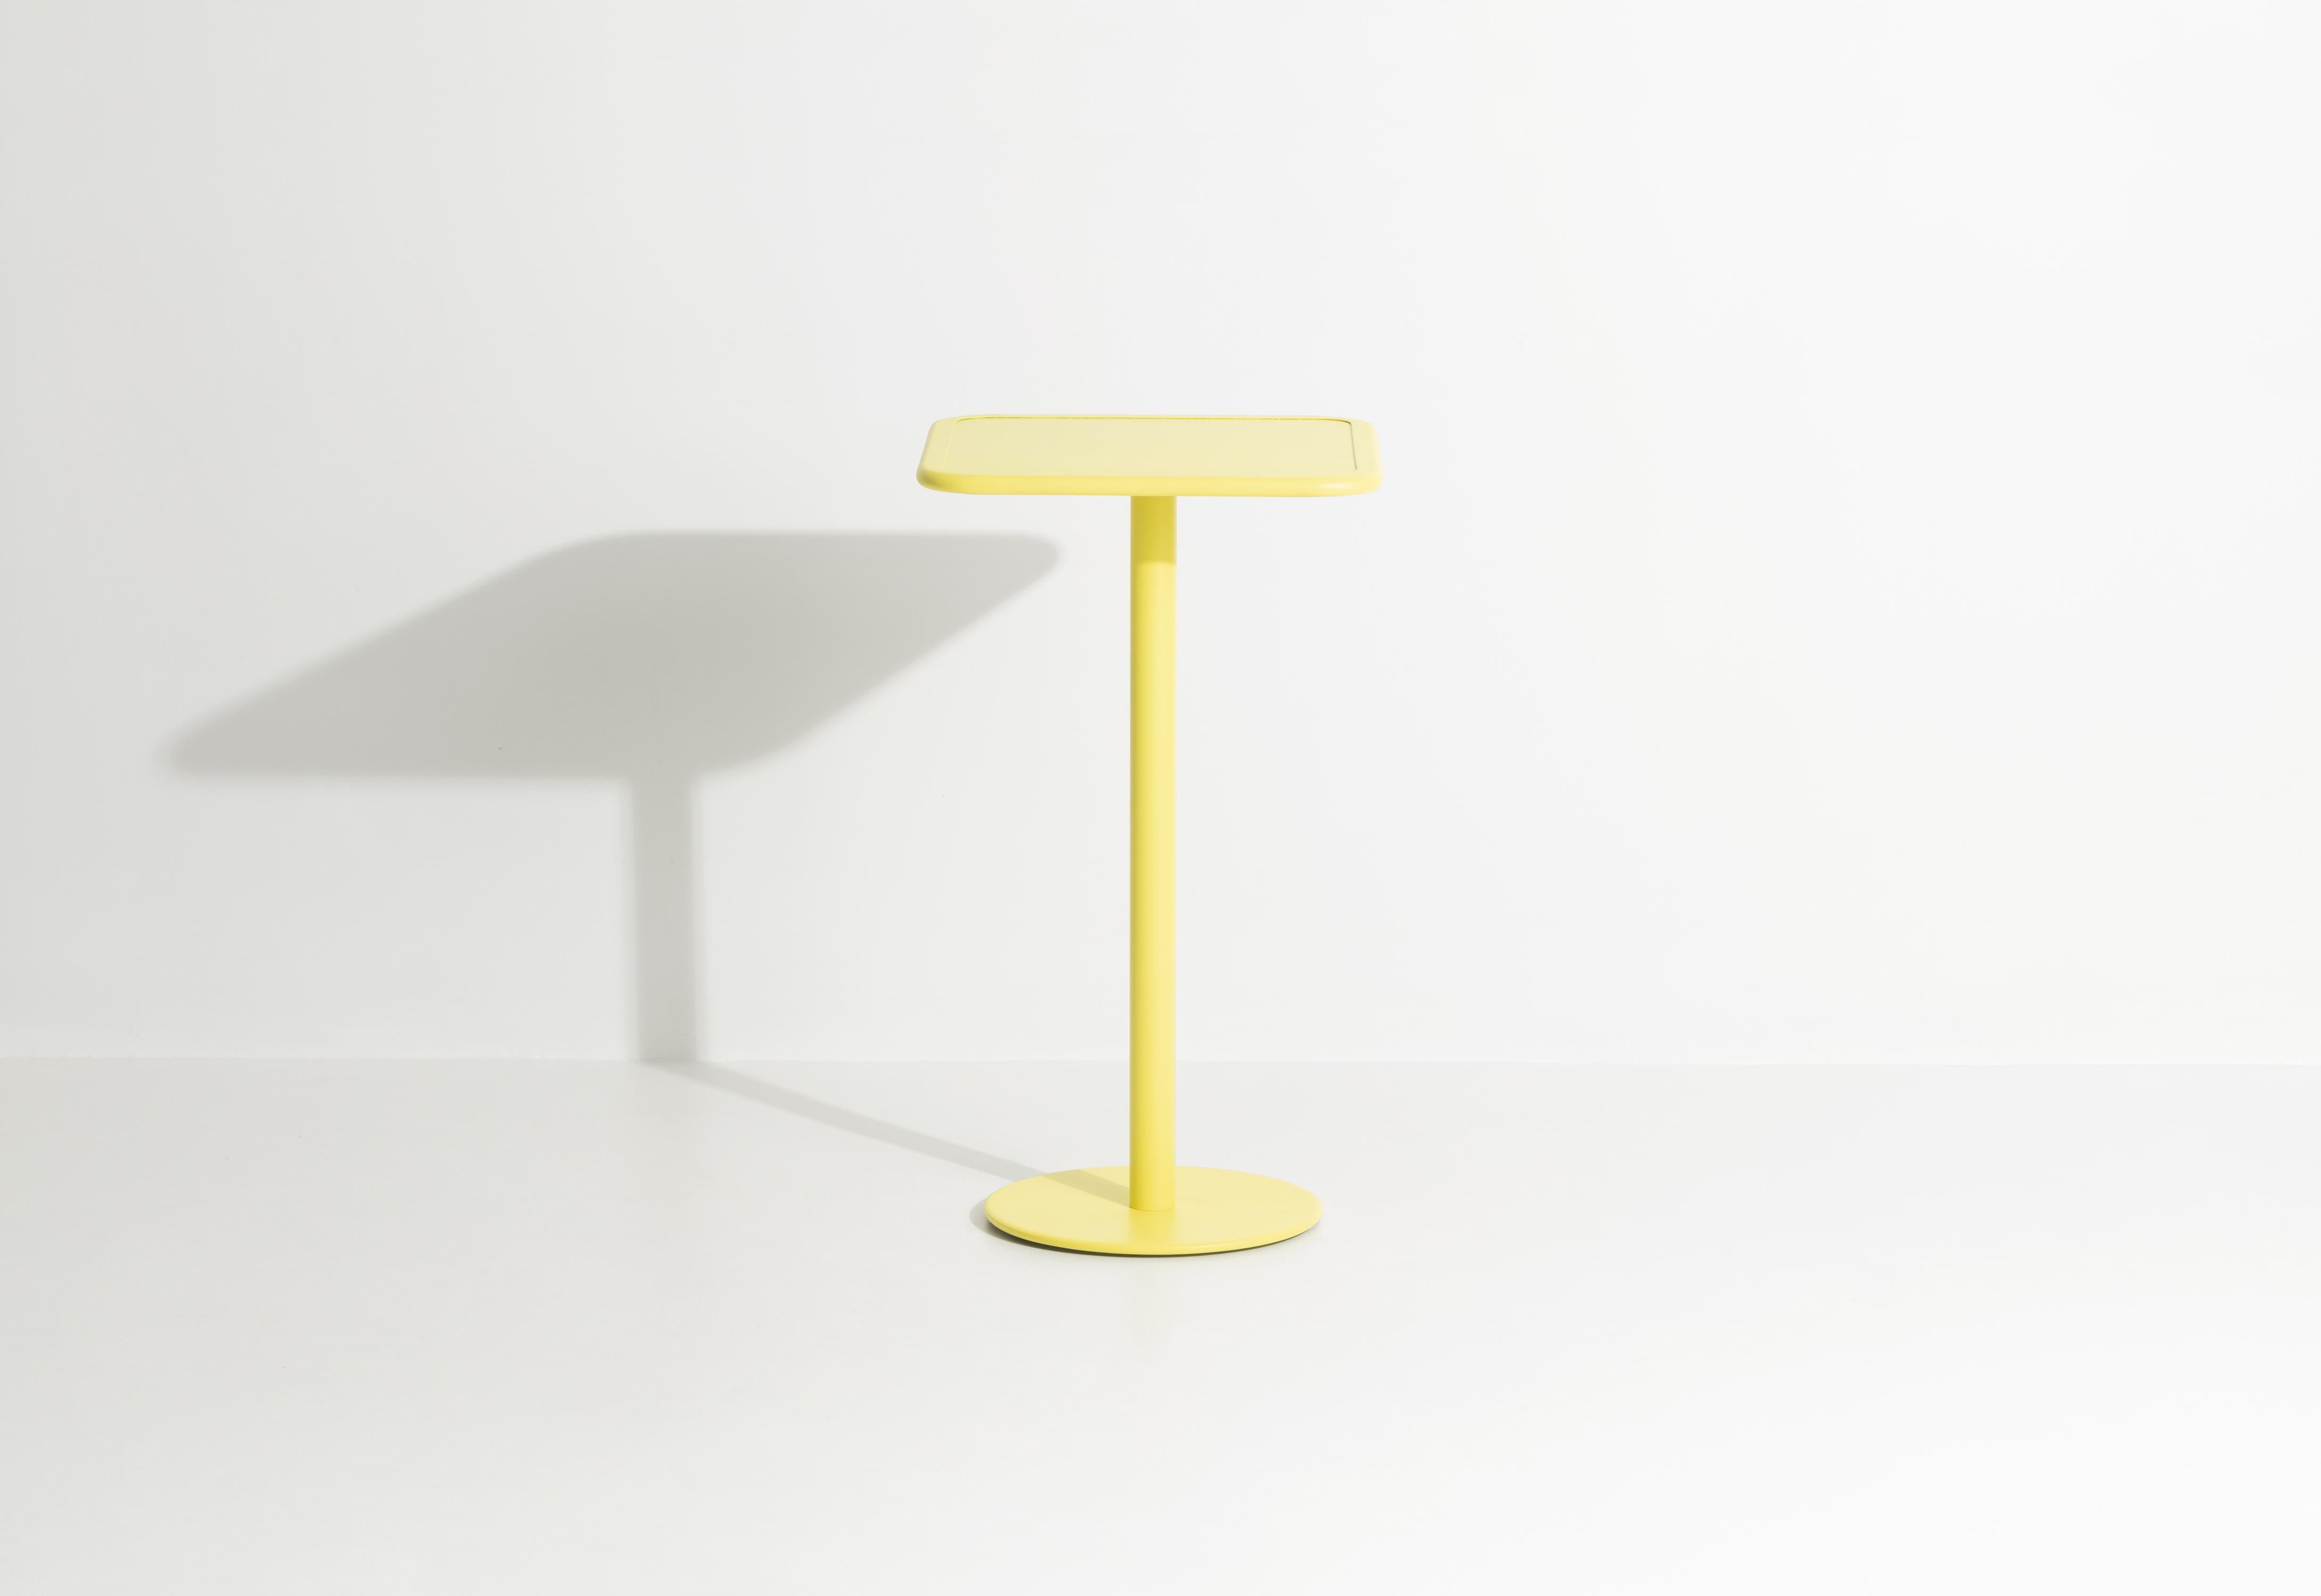 Petite Friture Week-End Square High Table in Yellow Aluminium, 2017 In New Condition For Sale In Brooklyn, NY